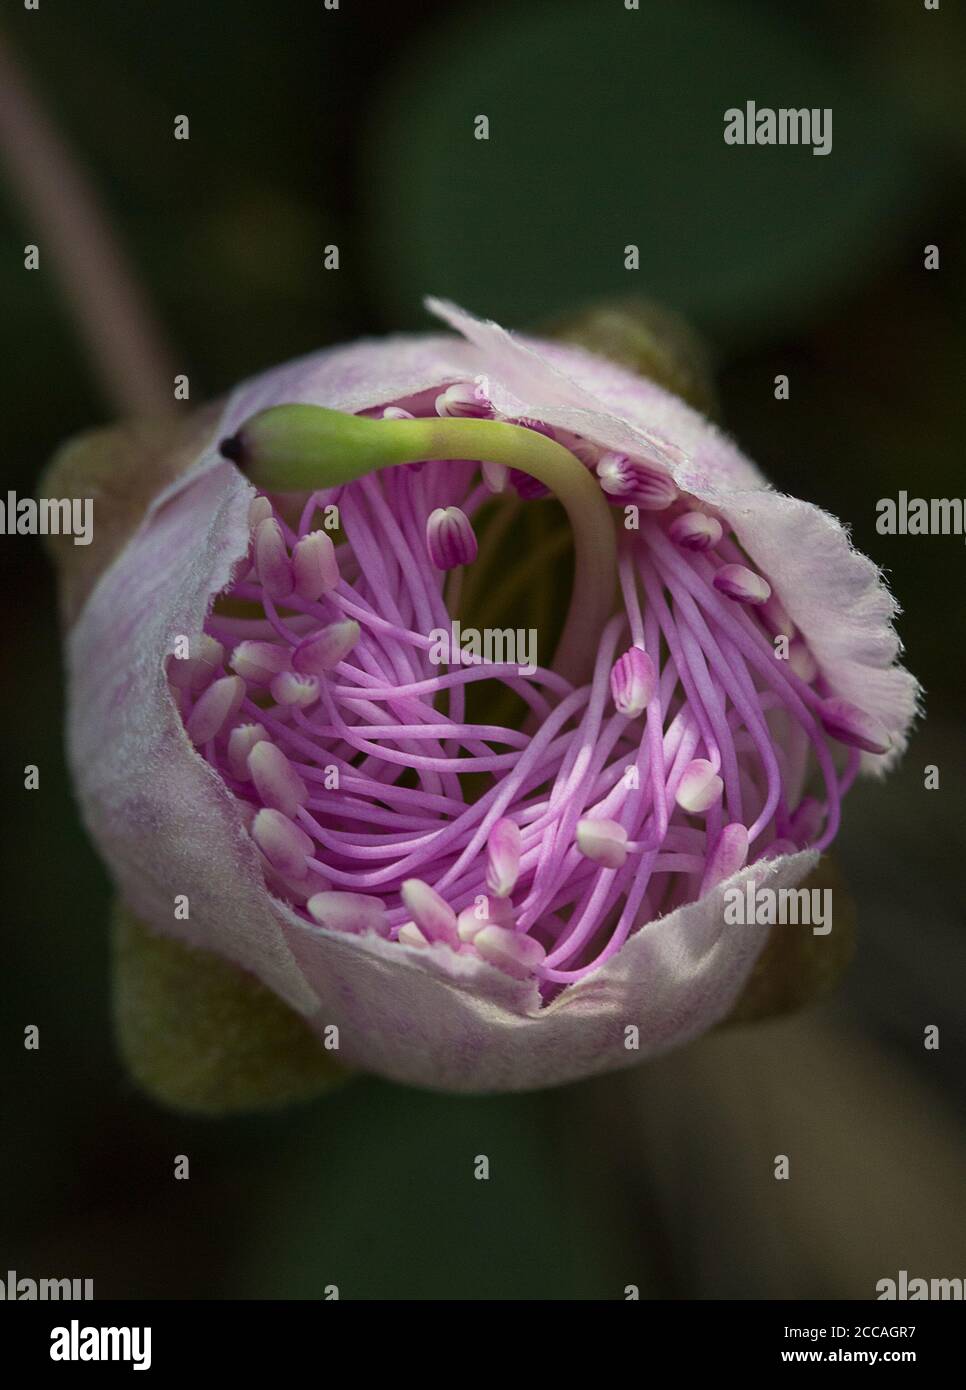 A flower on a Caper bush opening (Capparis spinosa) to show the intricate interior Stock Photo